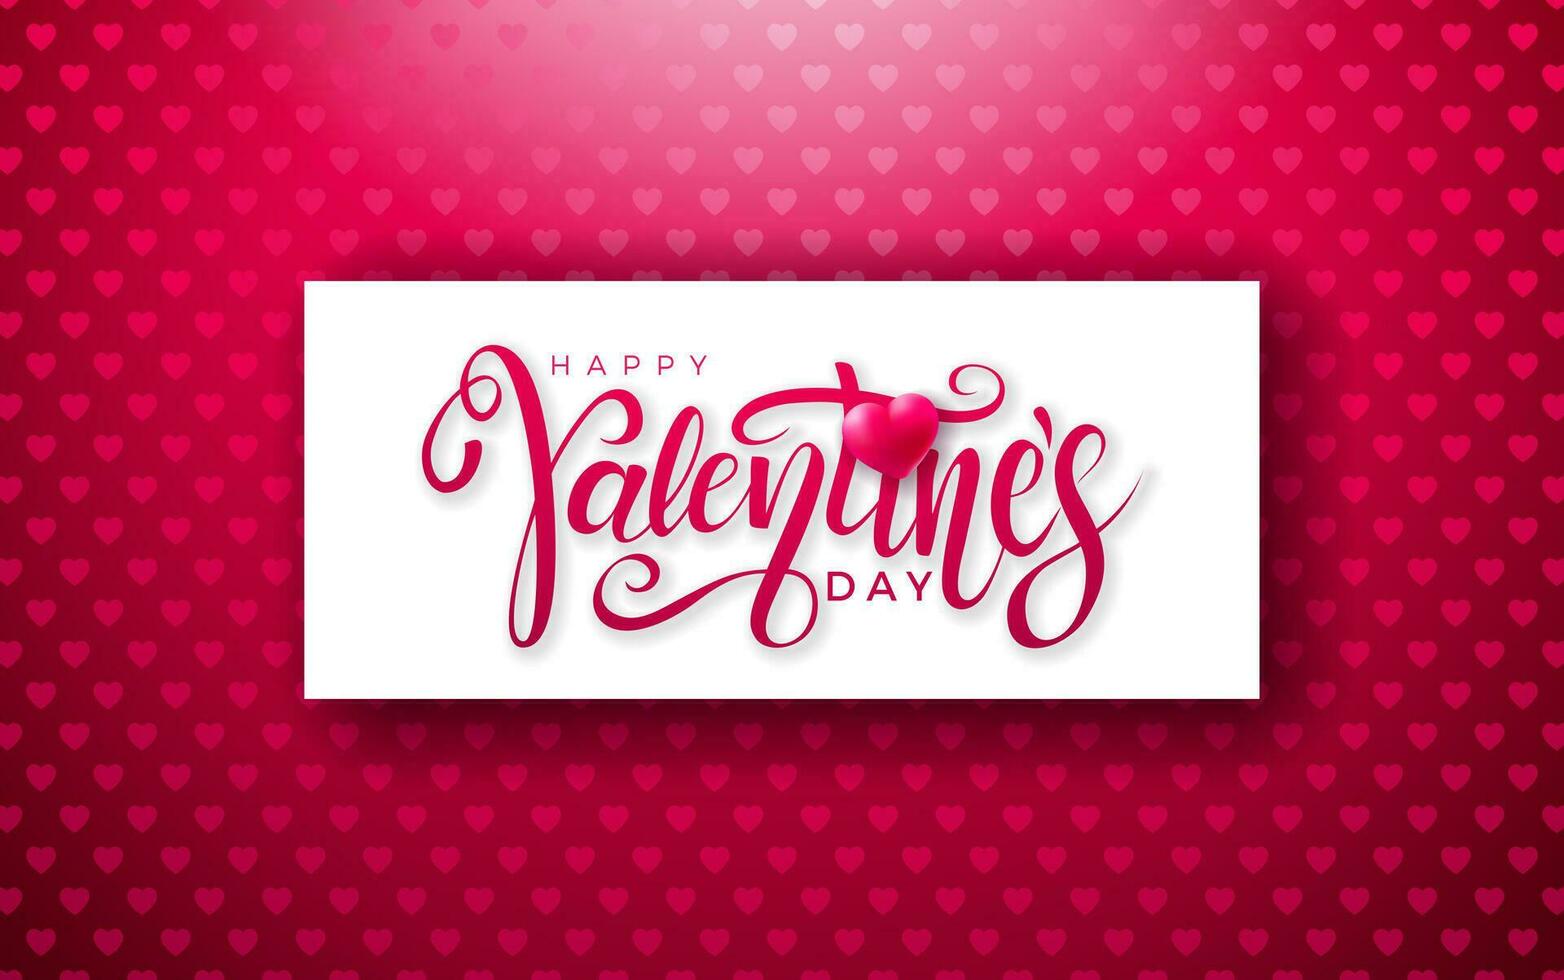 Happy Valentines Day Design with Heart and Typography Letter on Red Pattern Background. Vector Wedding and Romantic Love Valentine Theme Illustration for Flyer, Greeting Card, Banner, Holiday Poster